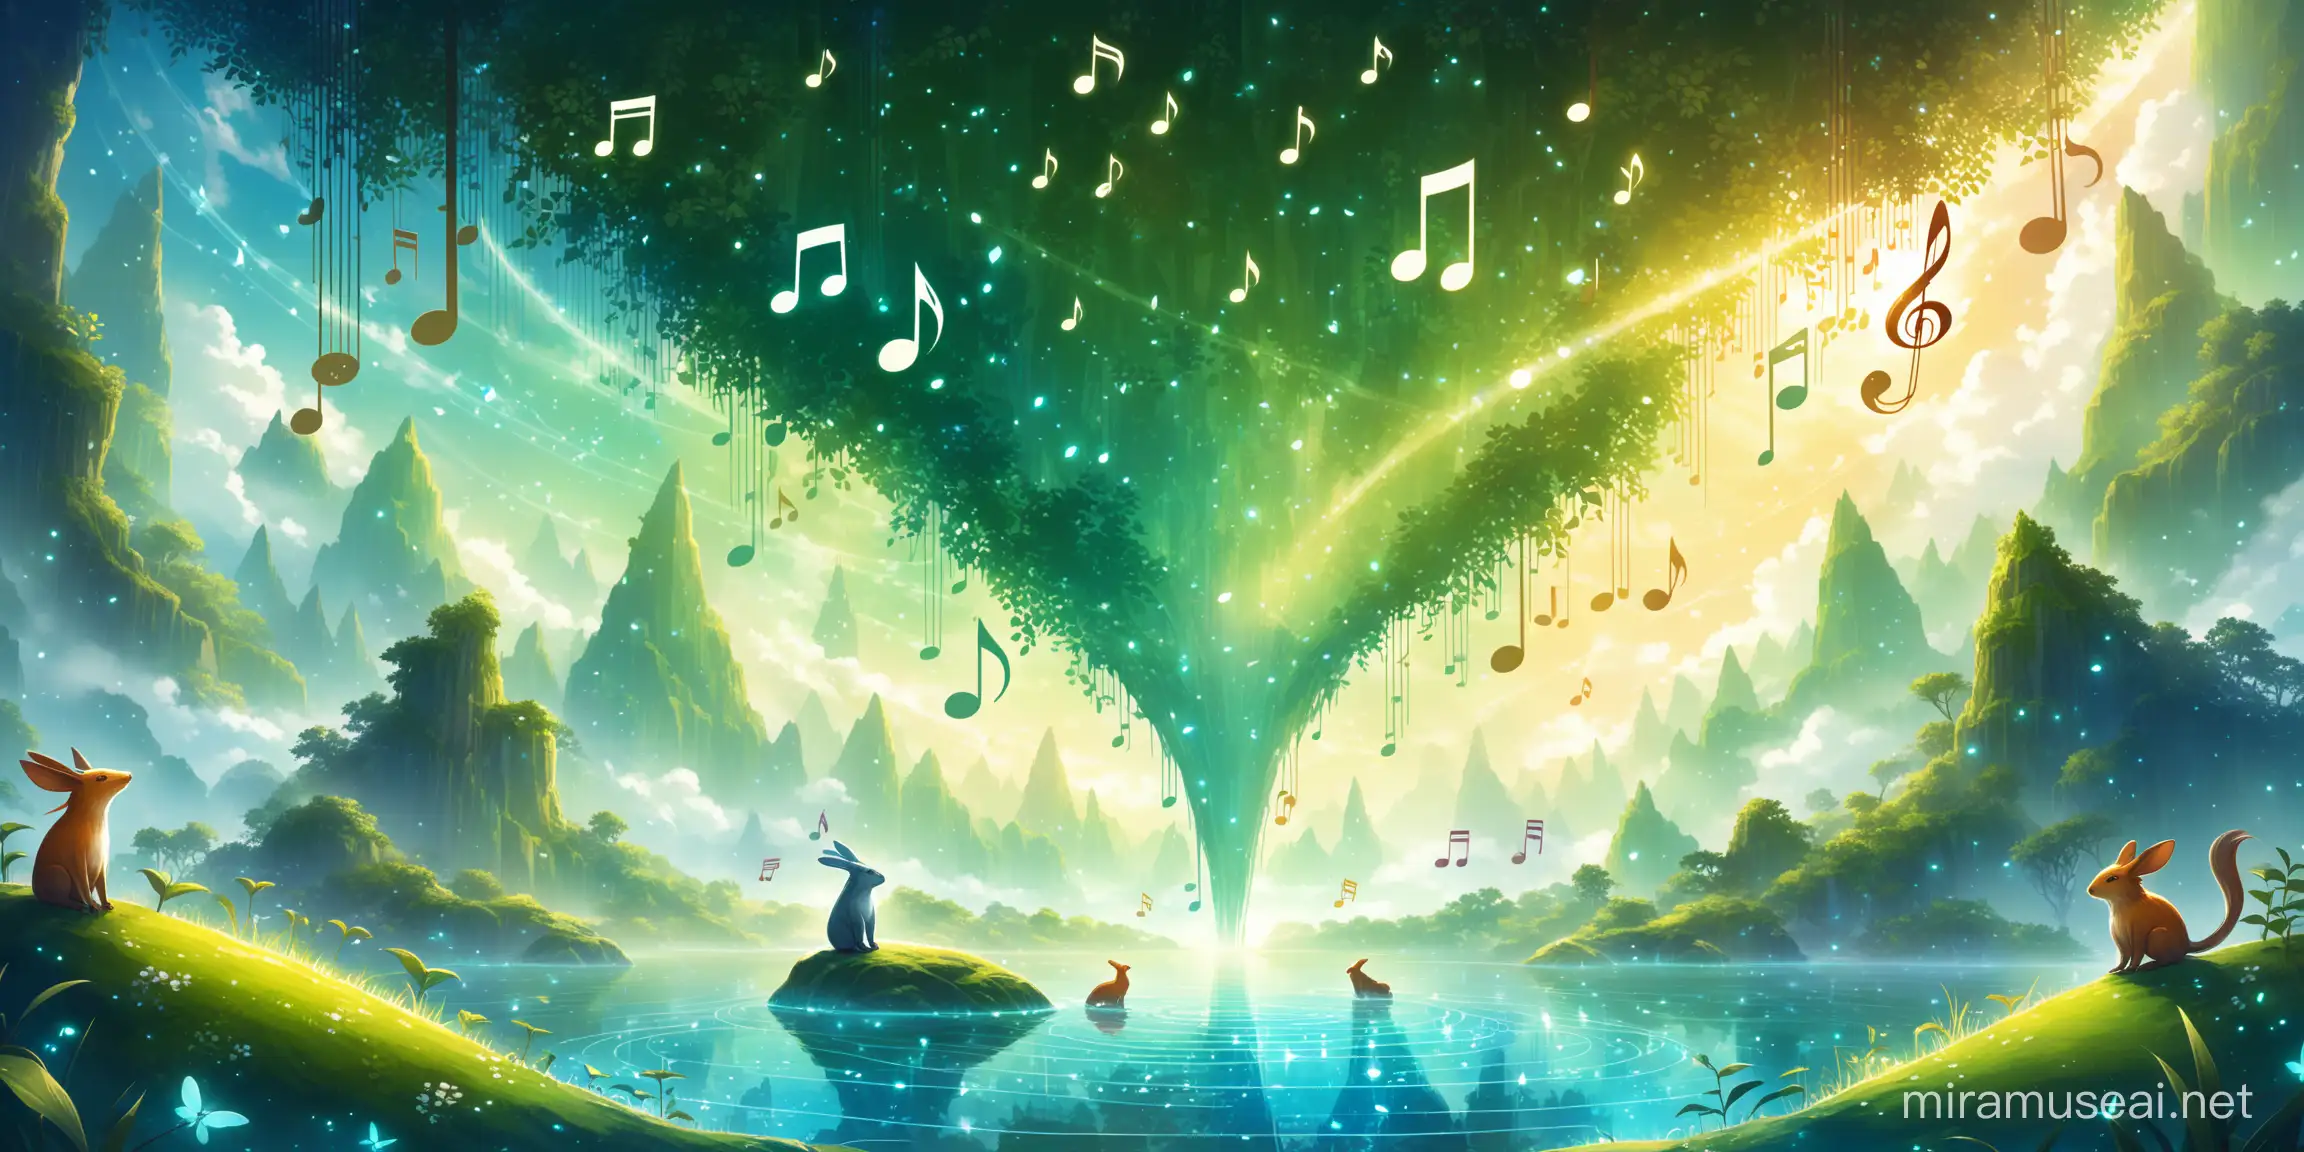 A musical tranquil world. Creatures in this world are surrounded by music notes in a fantasy ambient setting.